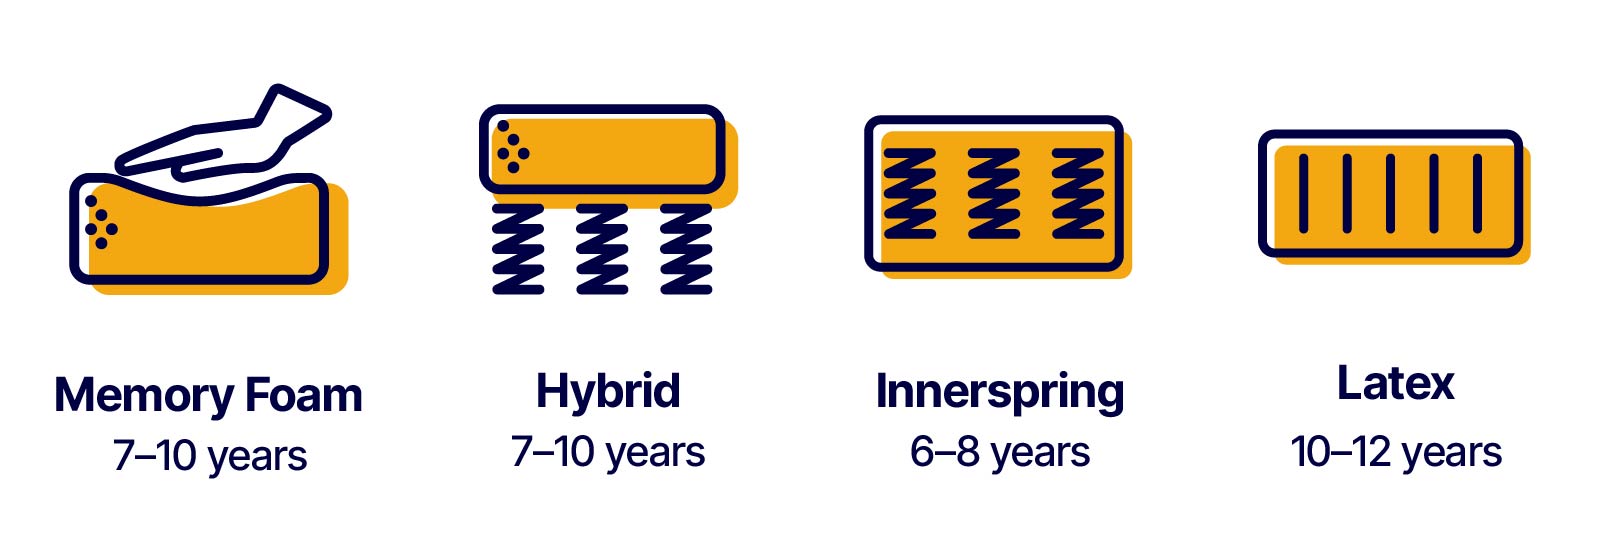 when should you replace your mattress: illustrations showing the lifespans of various mattress types, including memory foam (7 to 10 years), hybrid (7 to 10 years), innerspring (6 to 8 years), and latex (10 to 12 years)